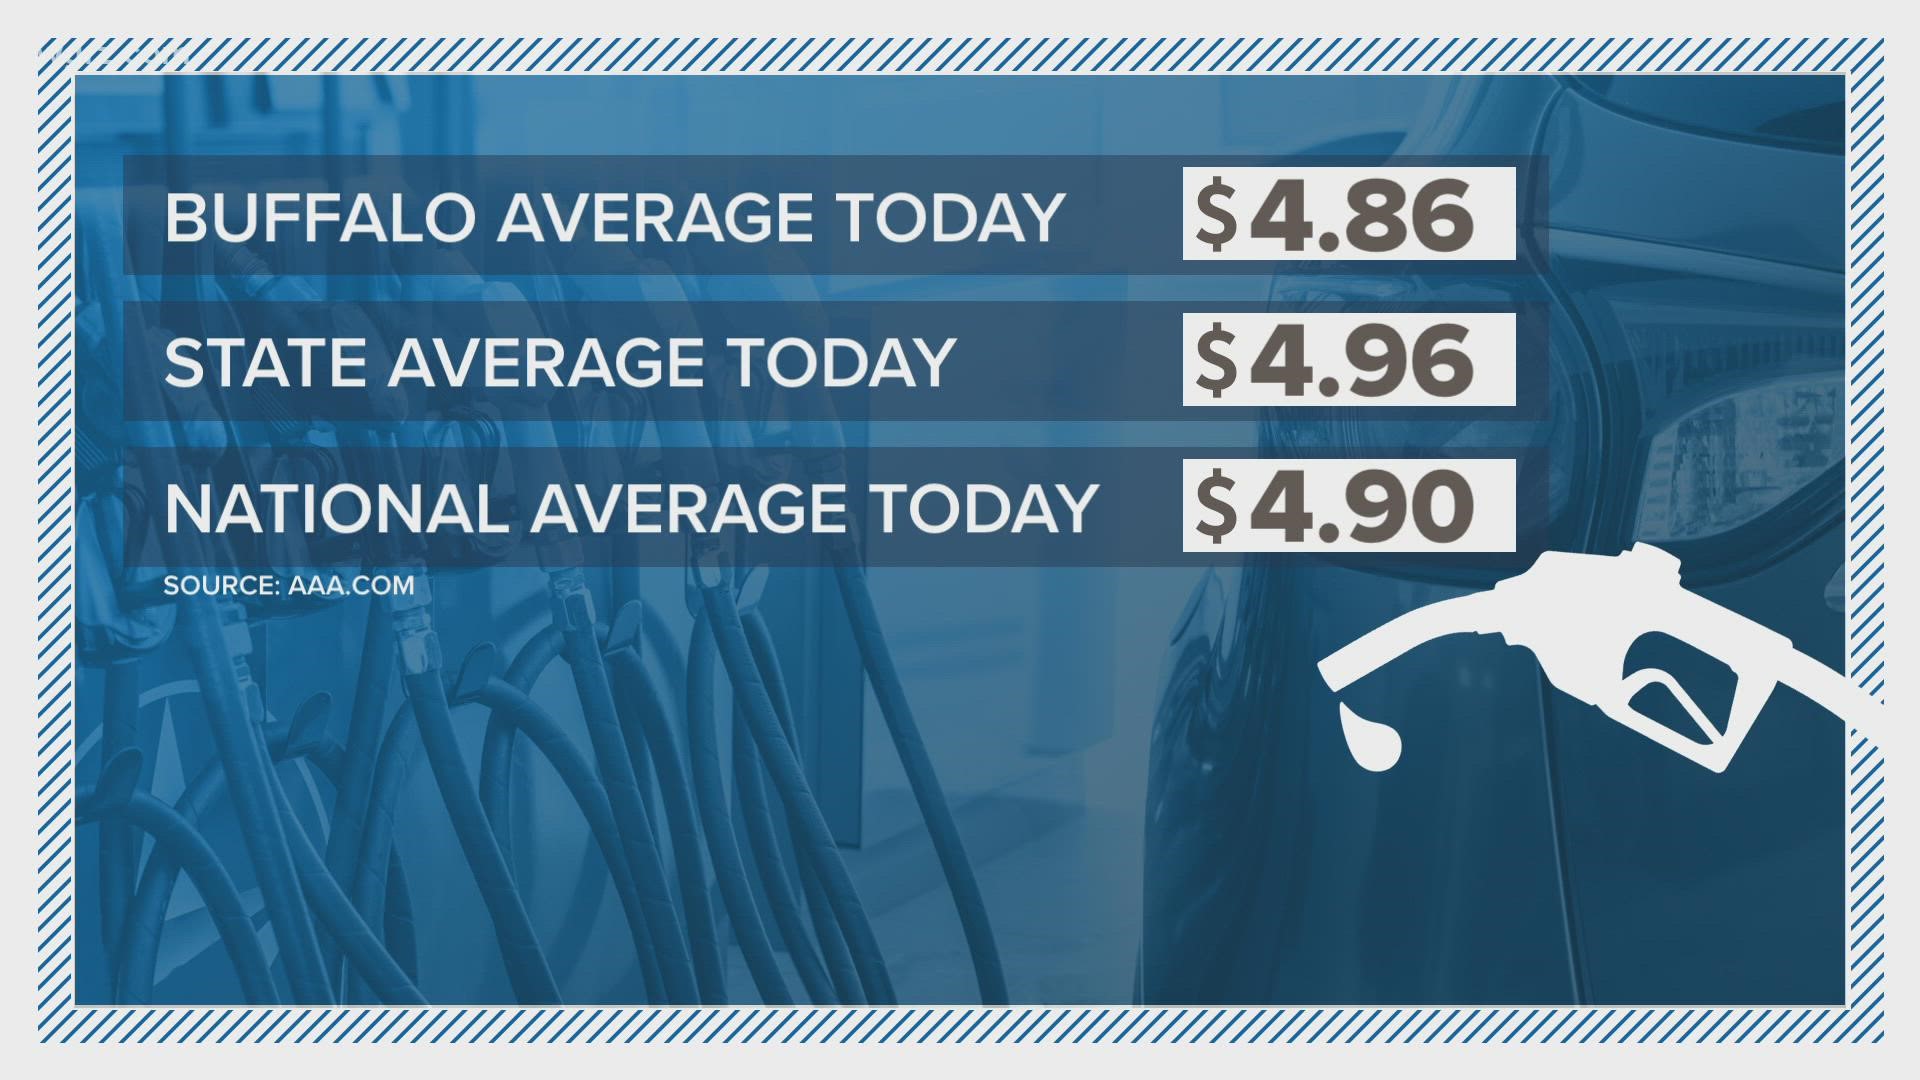 Triple-A says the average price for a gallon of regular gas in Buffalo is $4.86, which is lower than state and national averages.